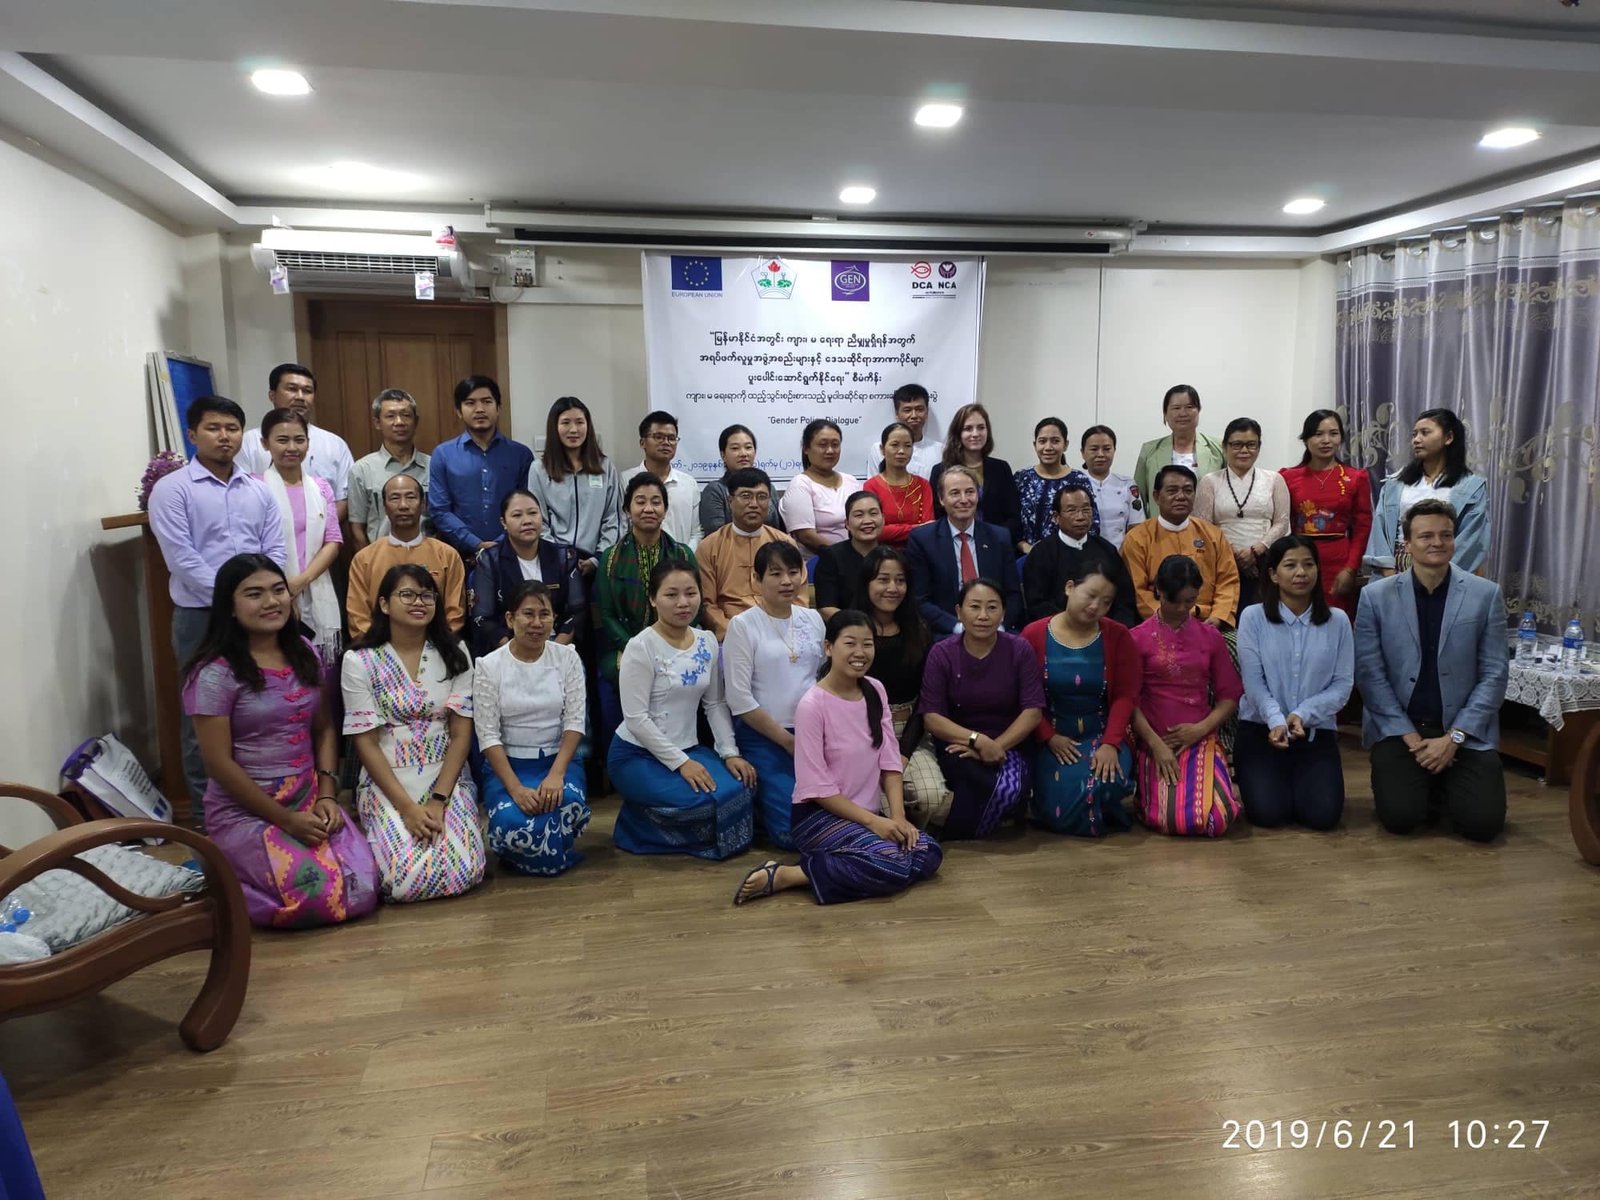 Gender Equality Workshop in Myitkyina Focuses on Greater Political Participation